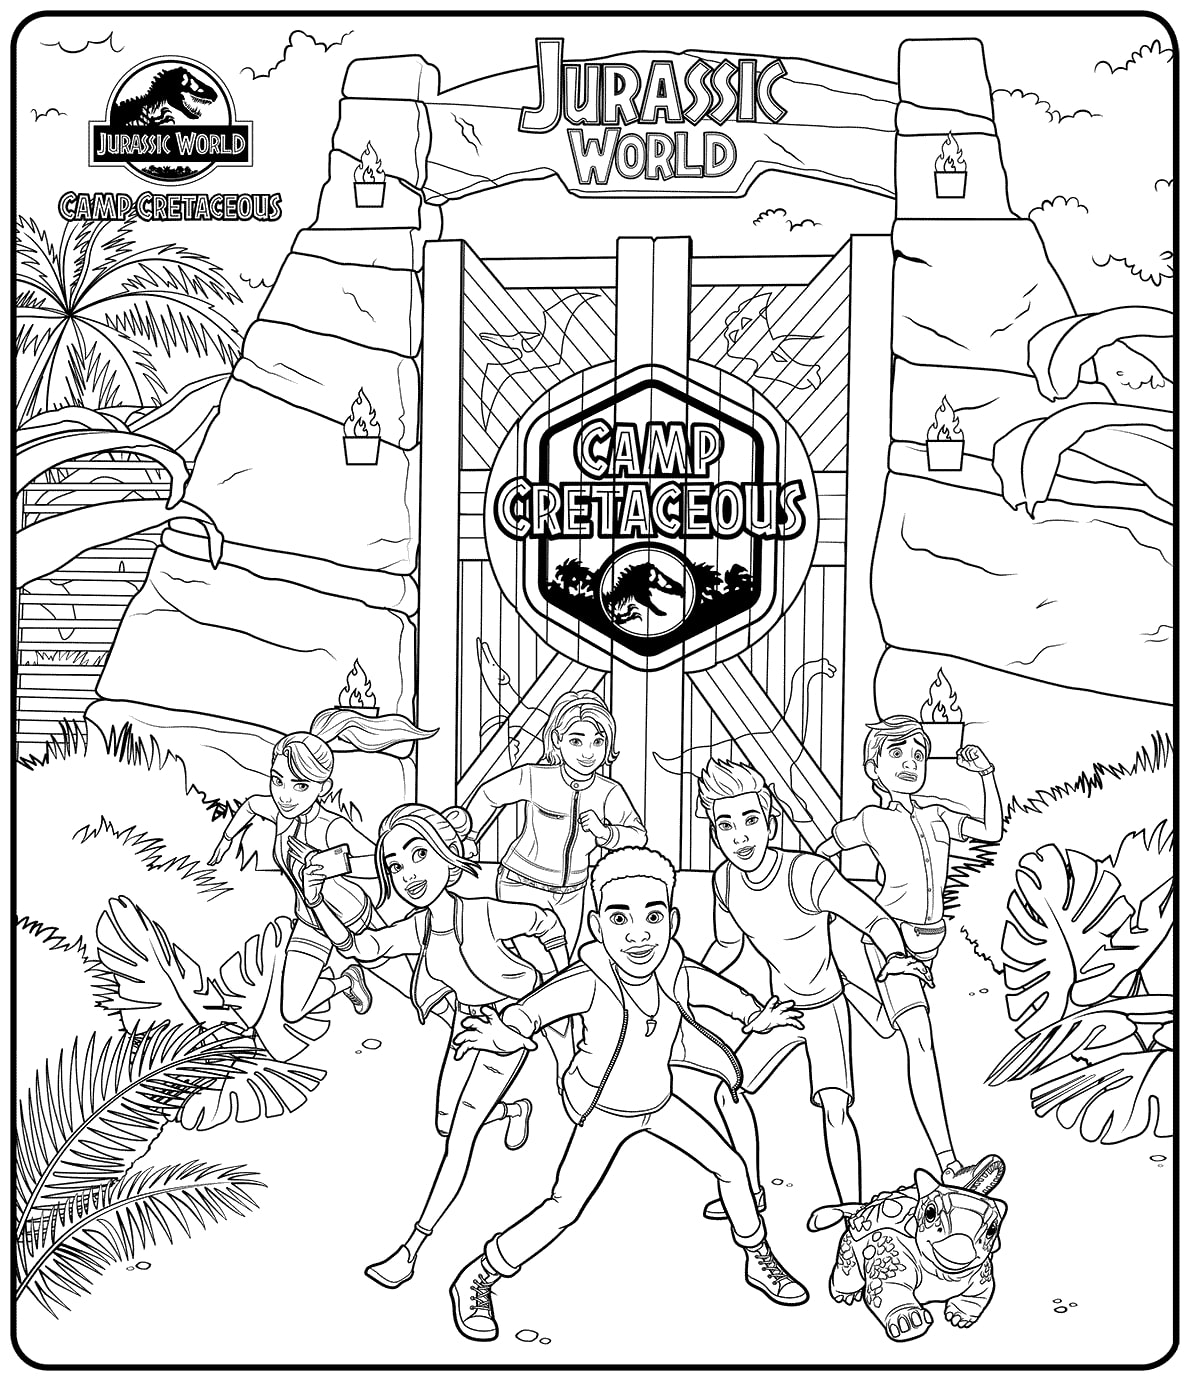 Jurassic World Camp Cretaceous Coloring Page Jurassic World Camp ...